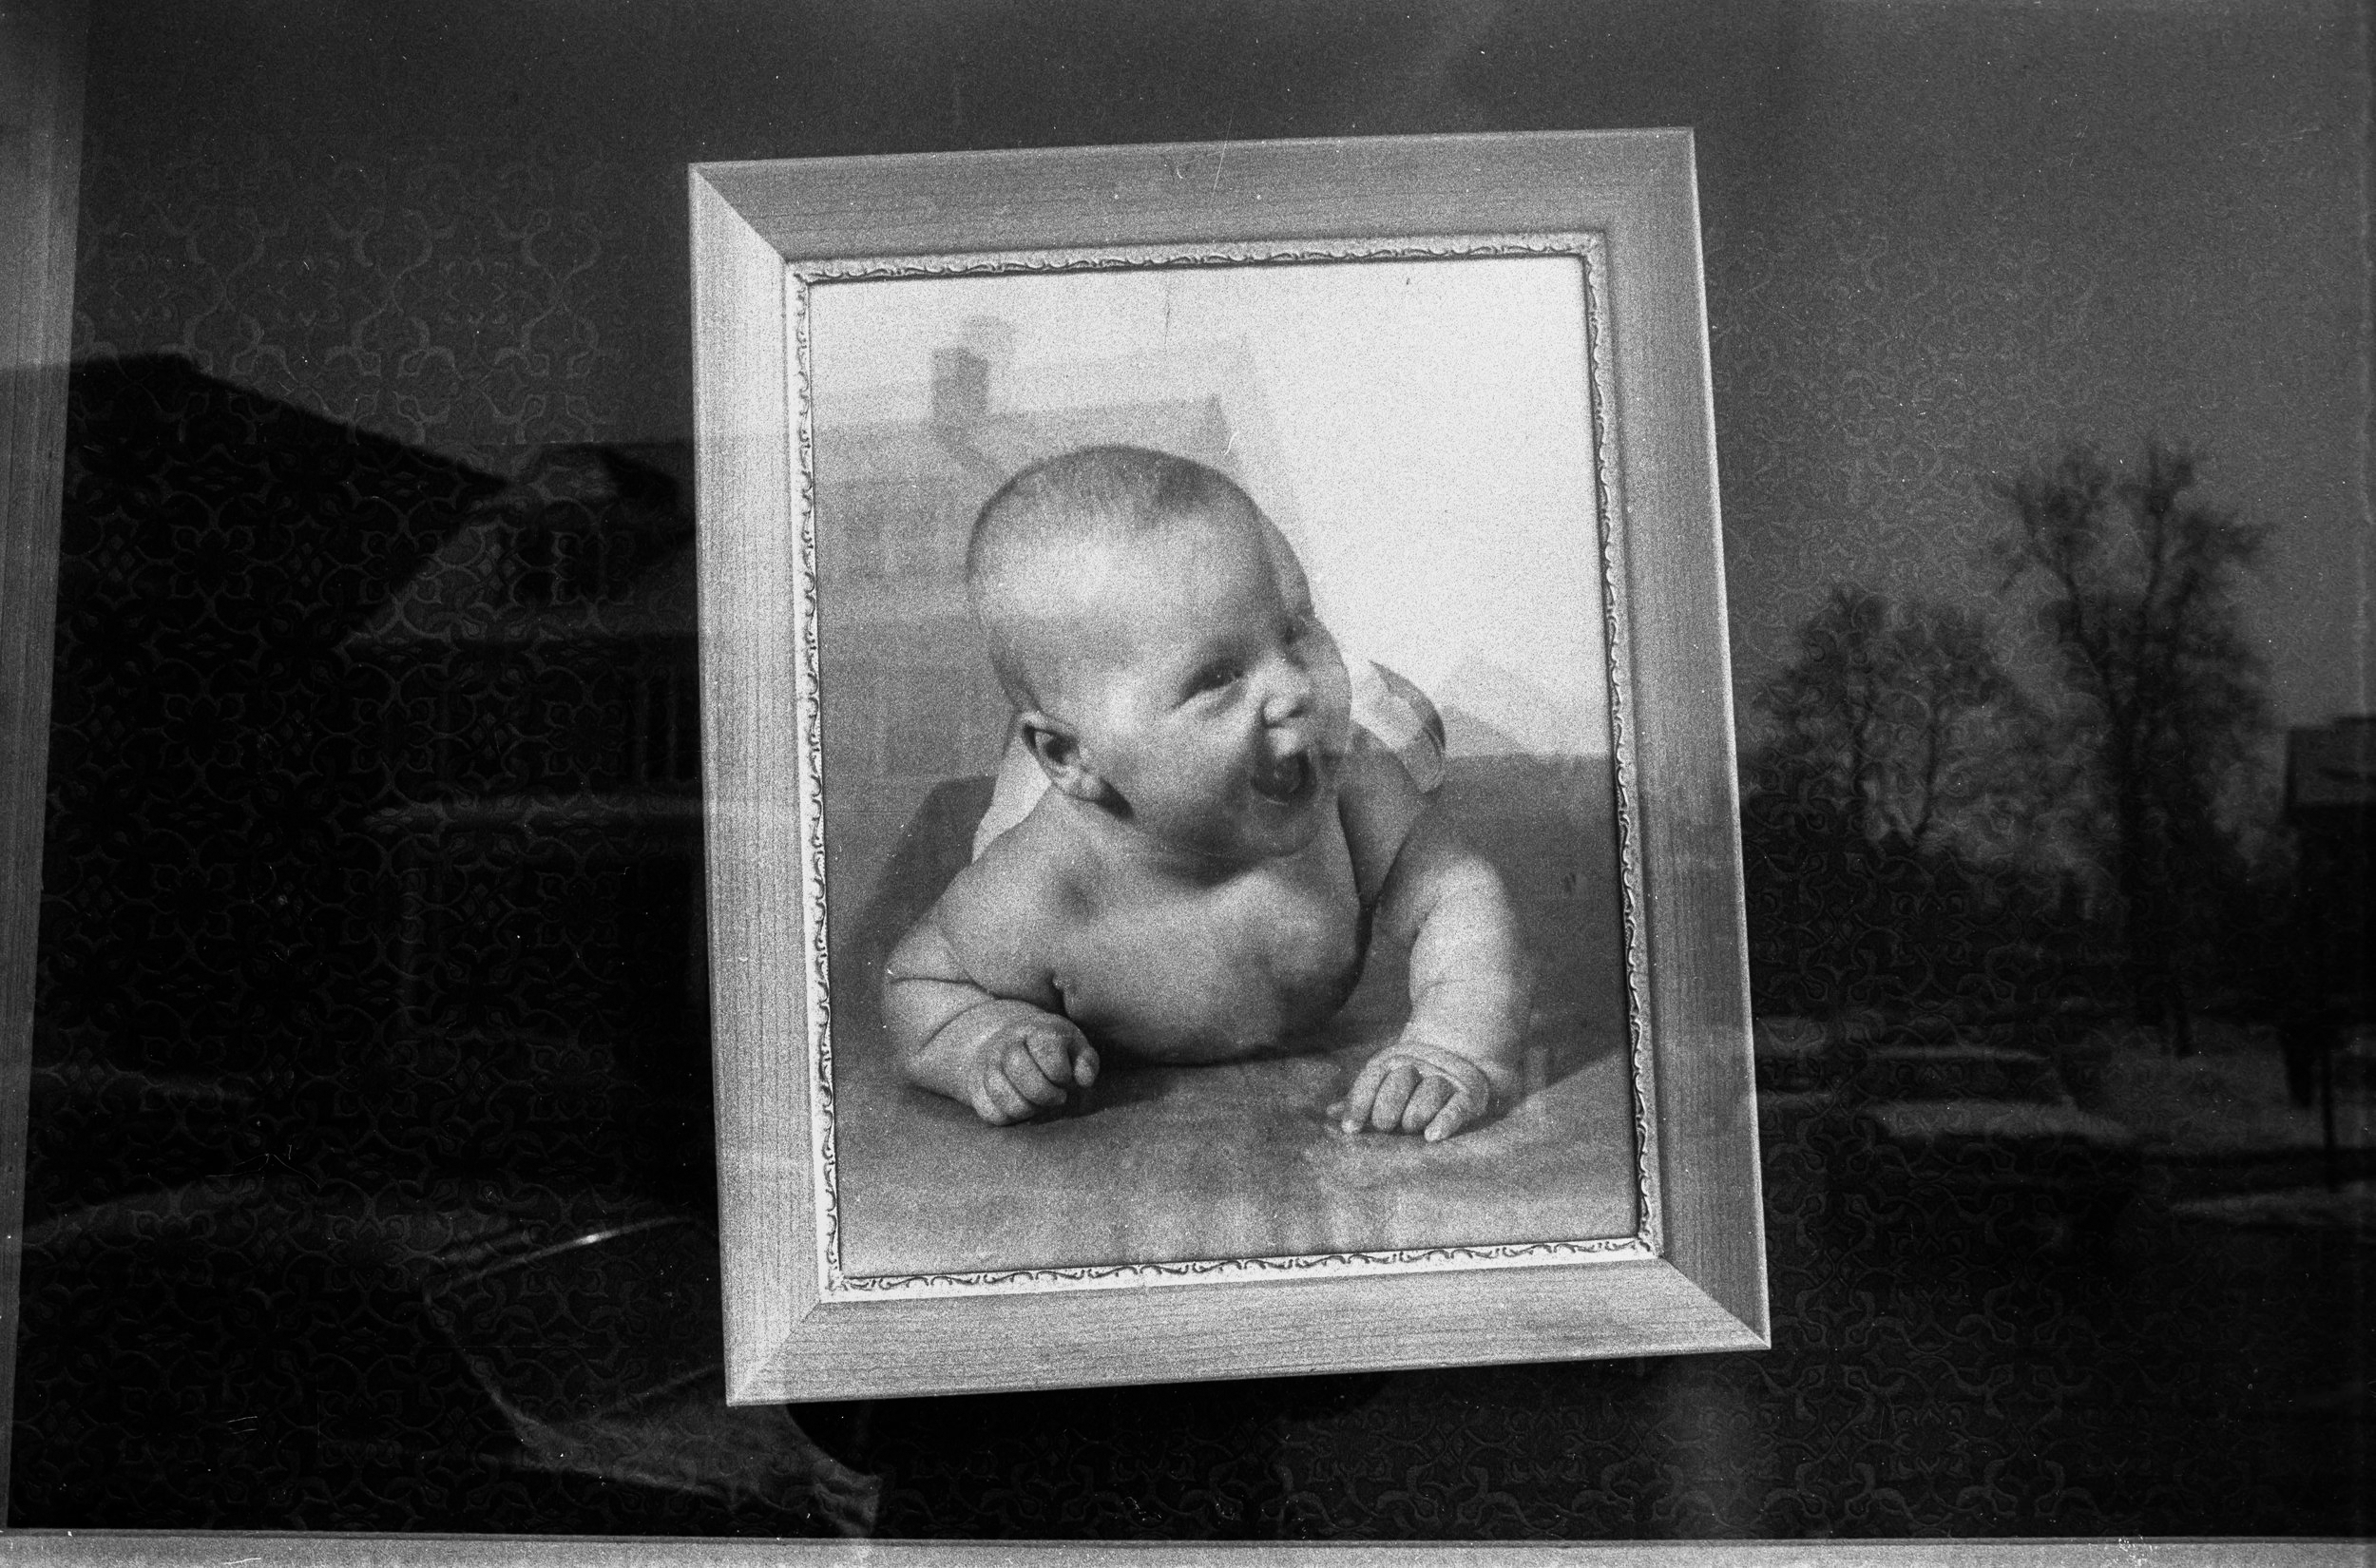   Self Portrait as Baby, Rochester, NY 1968  